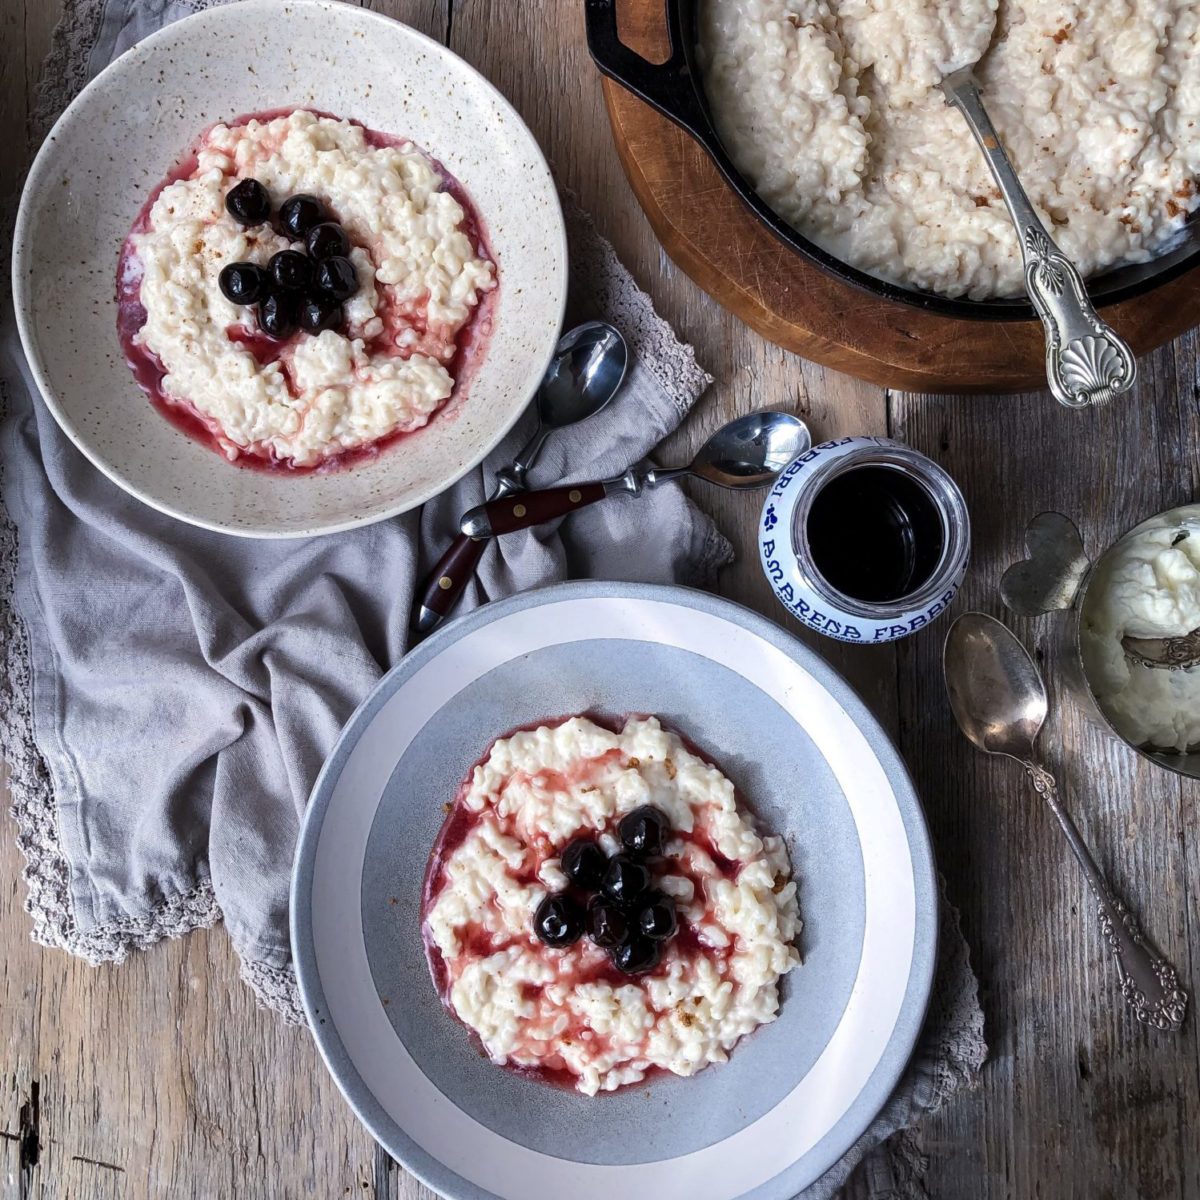 Swedish Rice Pudding with Sour Cherries in Syrup